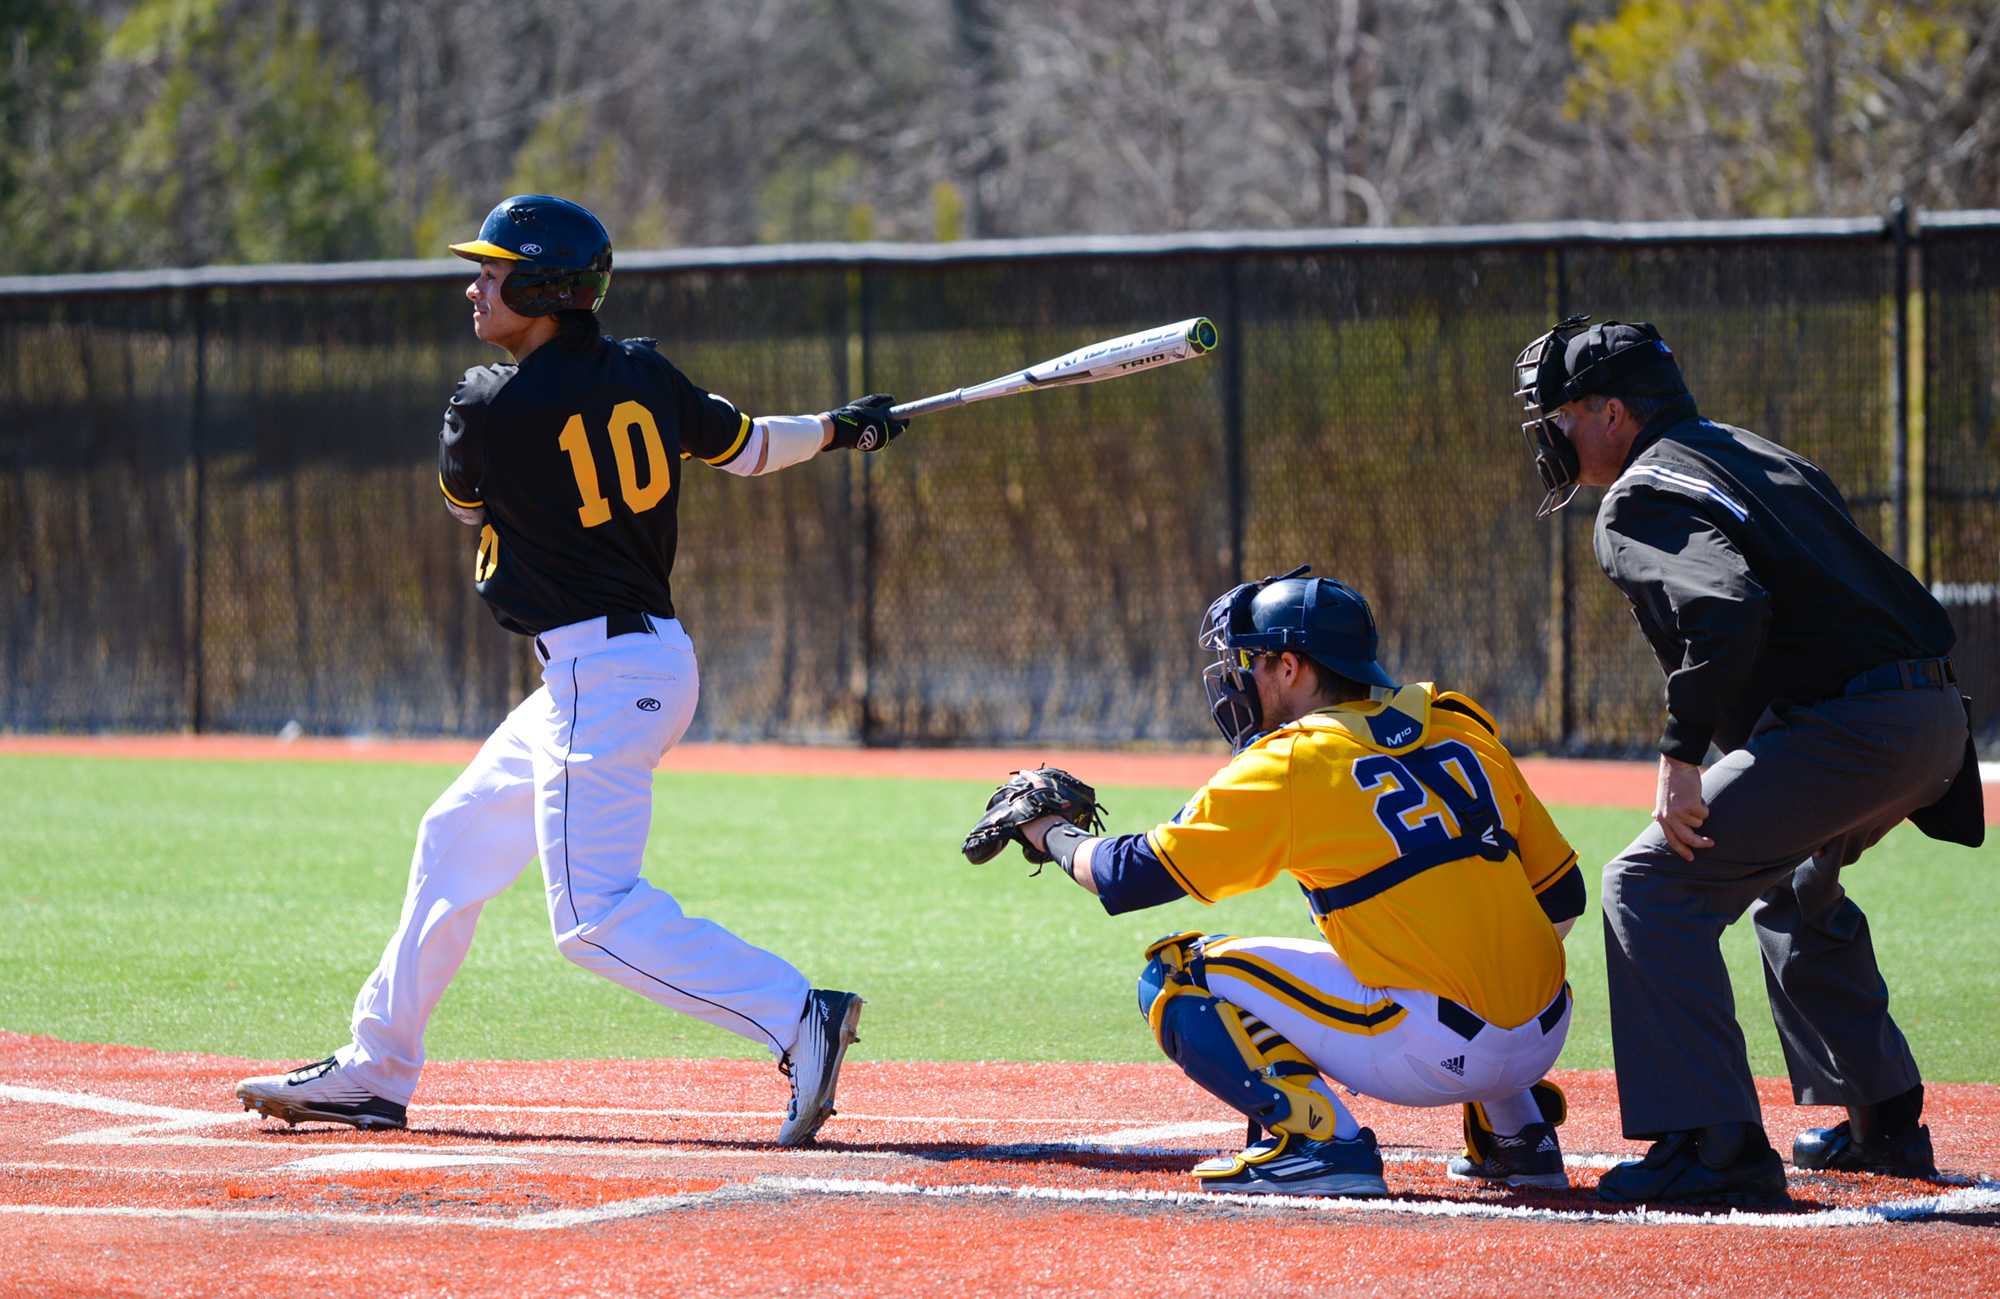 Freshman+outfielder+Tanner+Mann-Fix+completes+his+swing+followed+by+a+slide+to+third+base+on+February+28+against+Quinnipiac.+Photo+by+Dallas+Linger.